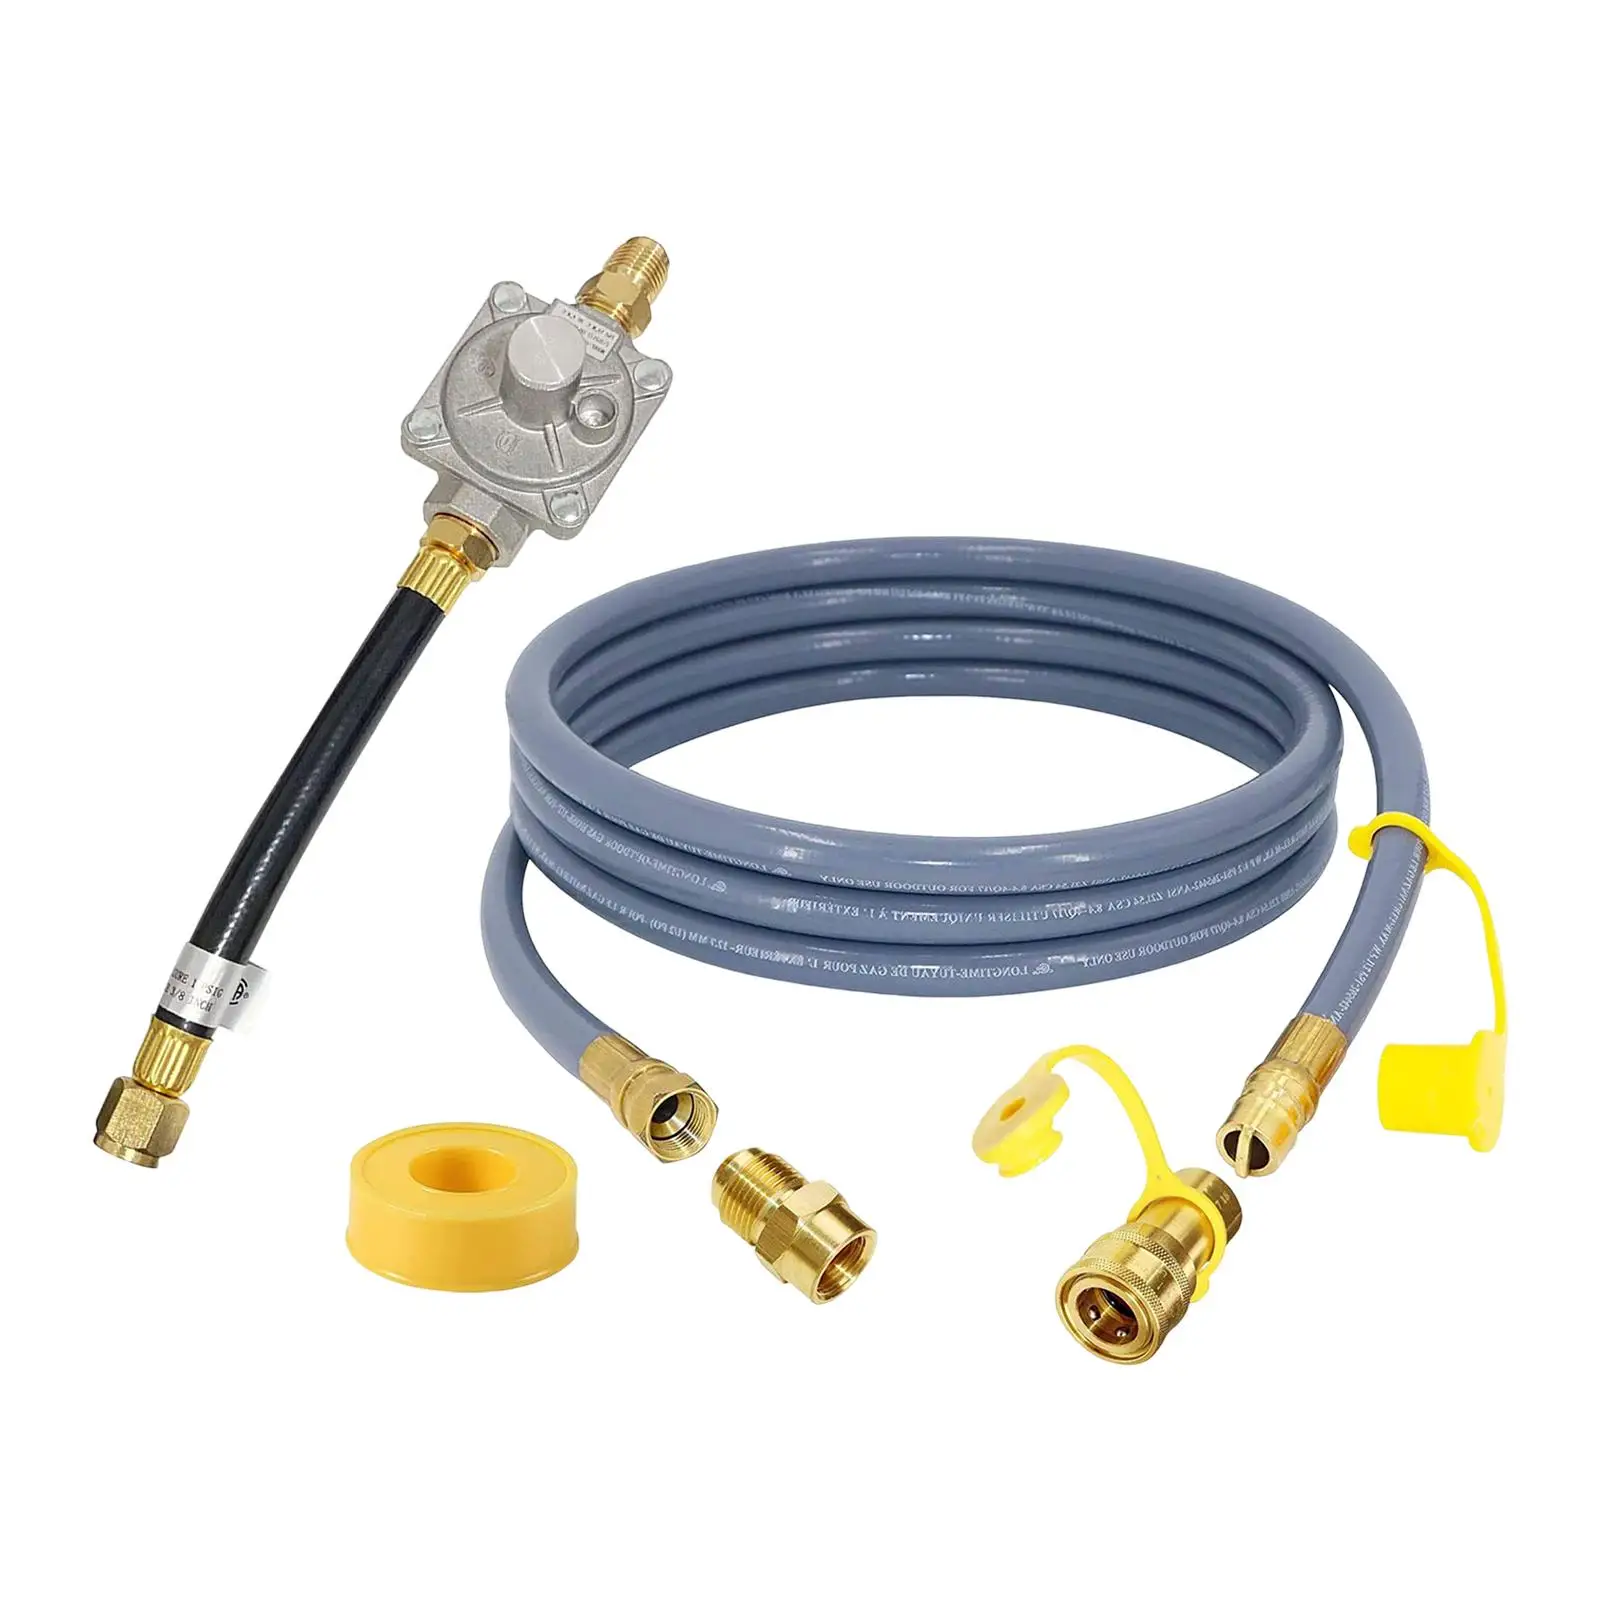 3Meter 1/2 inch Natural Gas Hose with Quick Connect Fitting Gas Line Propane Quick Connect Hose for Low Pressure BBQ Pizza Oven